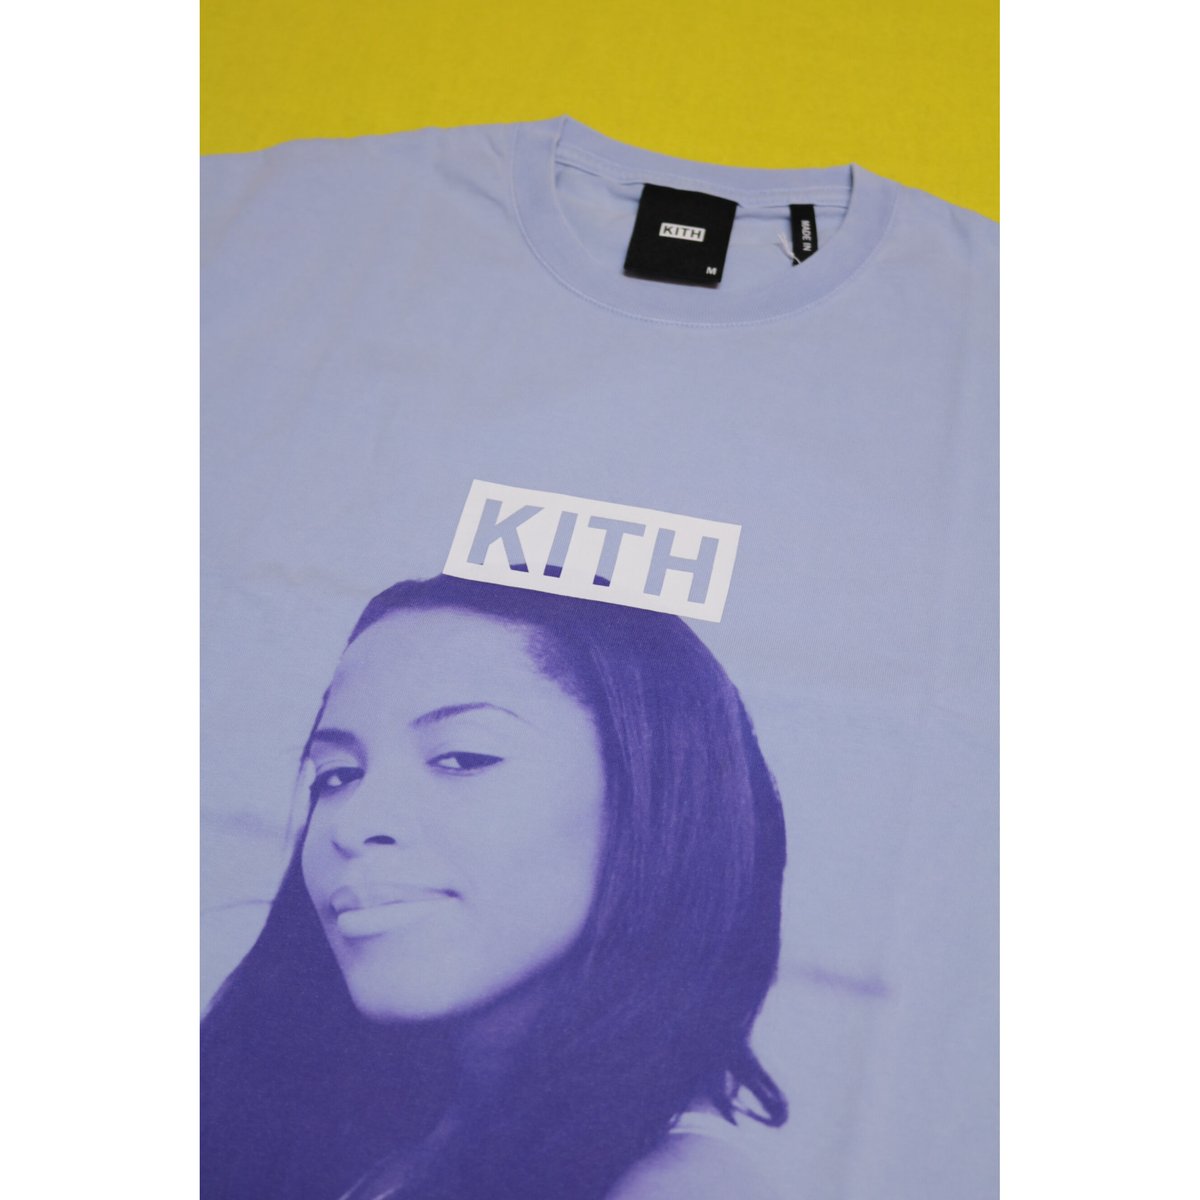 KITH x RW x AALIYAH BACK & FORCE VINTAGE T Avalanche Size M